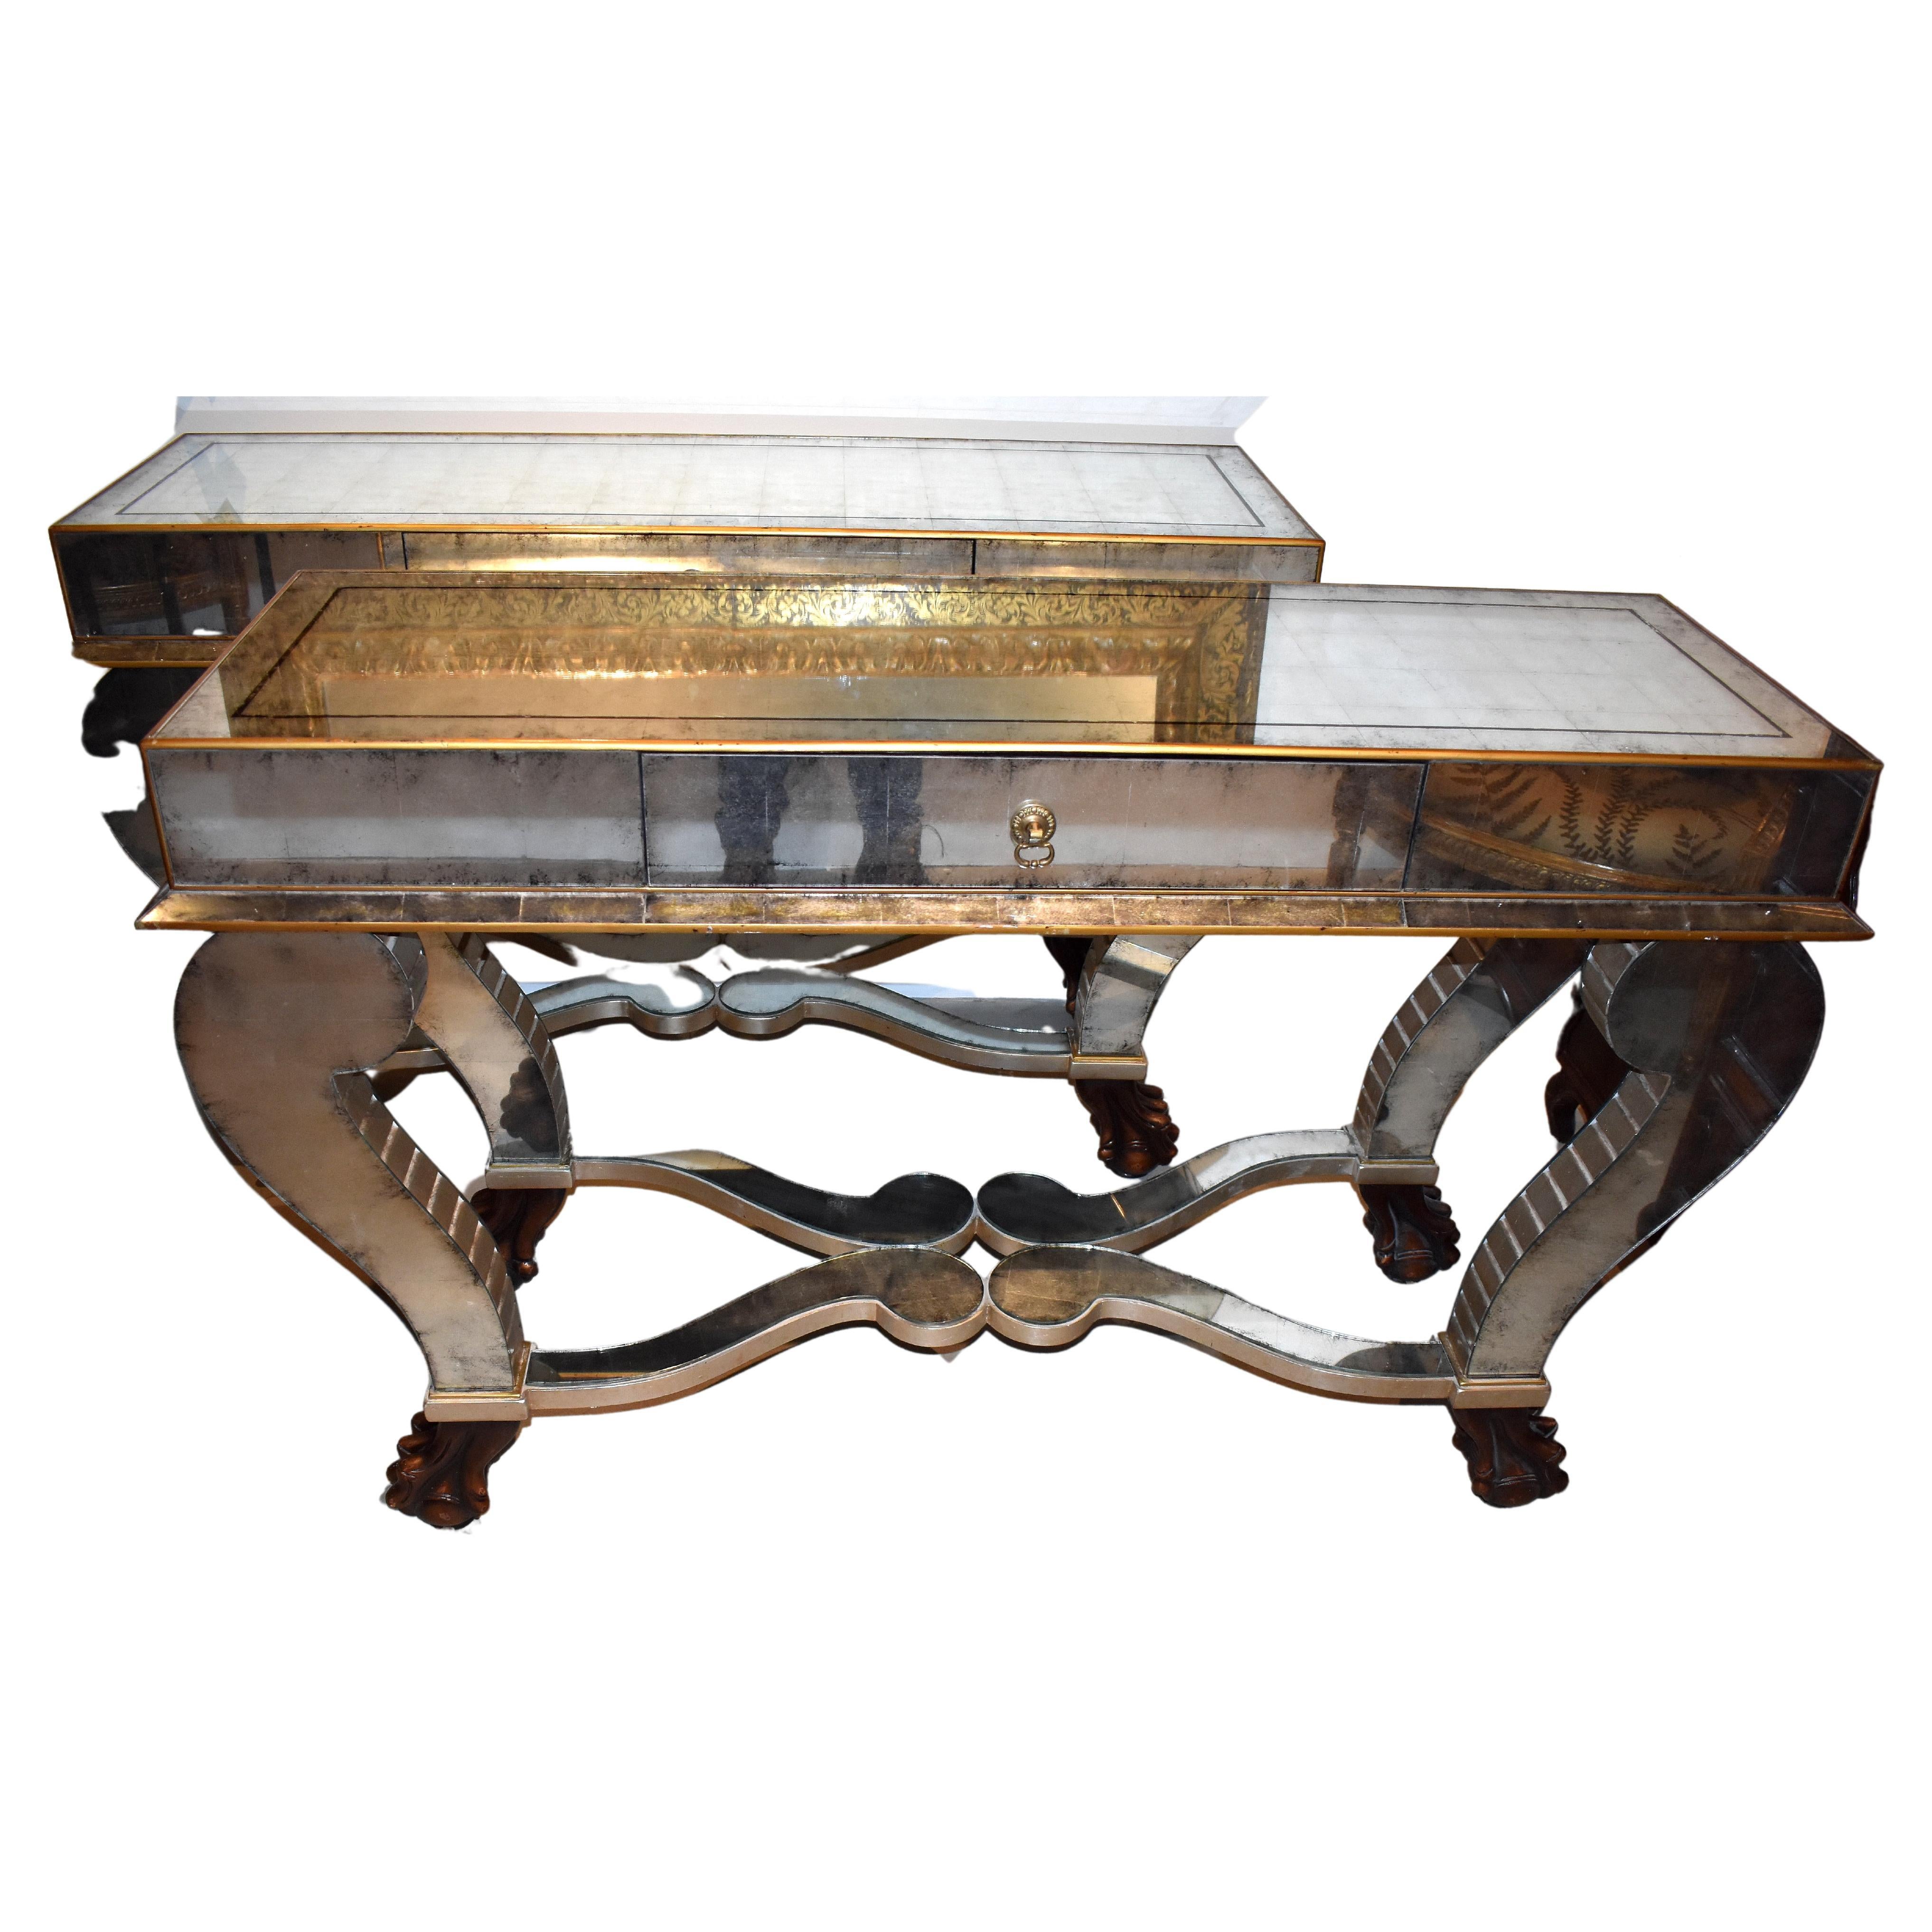 Pair of Serge Roche Style Mirrored Console Tables